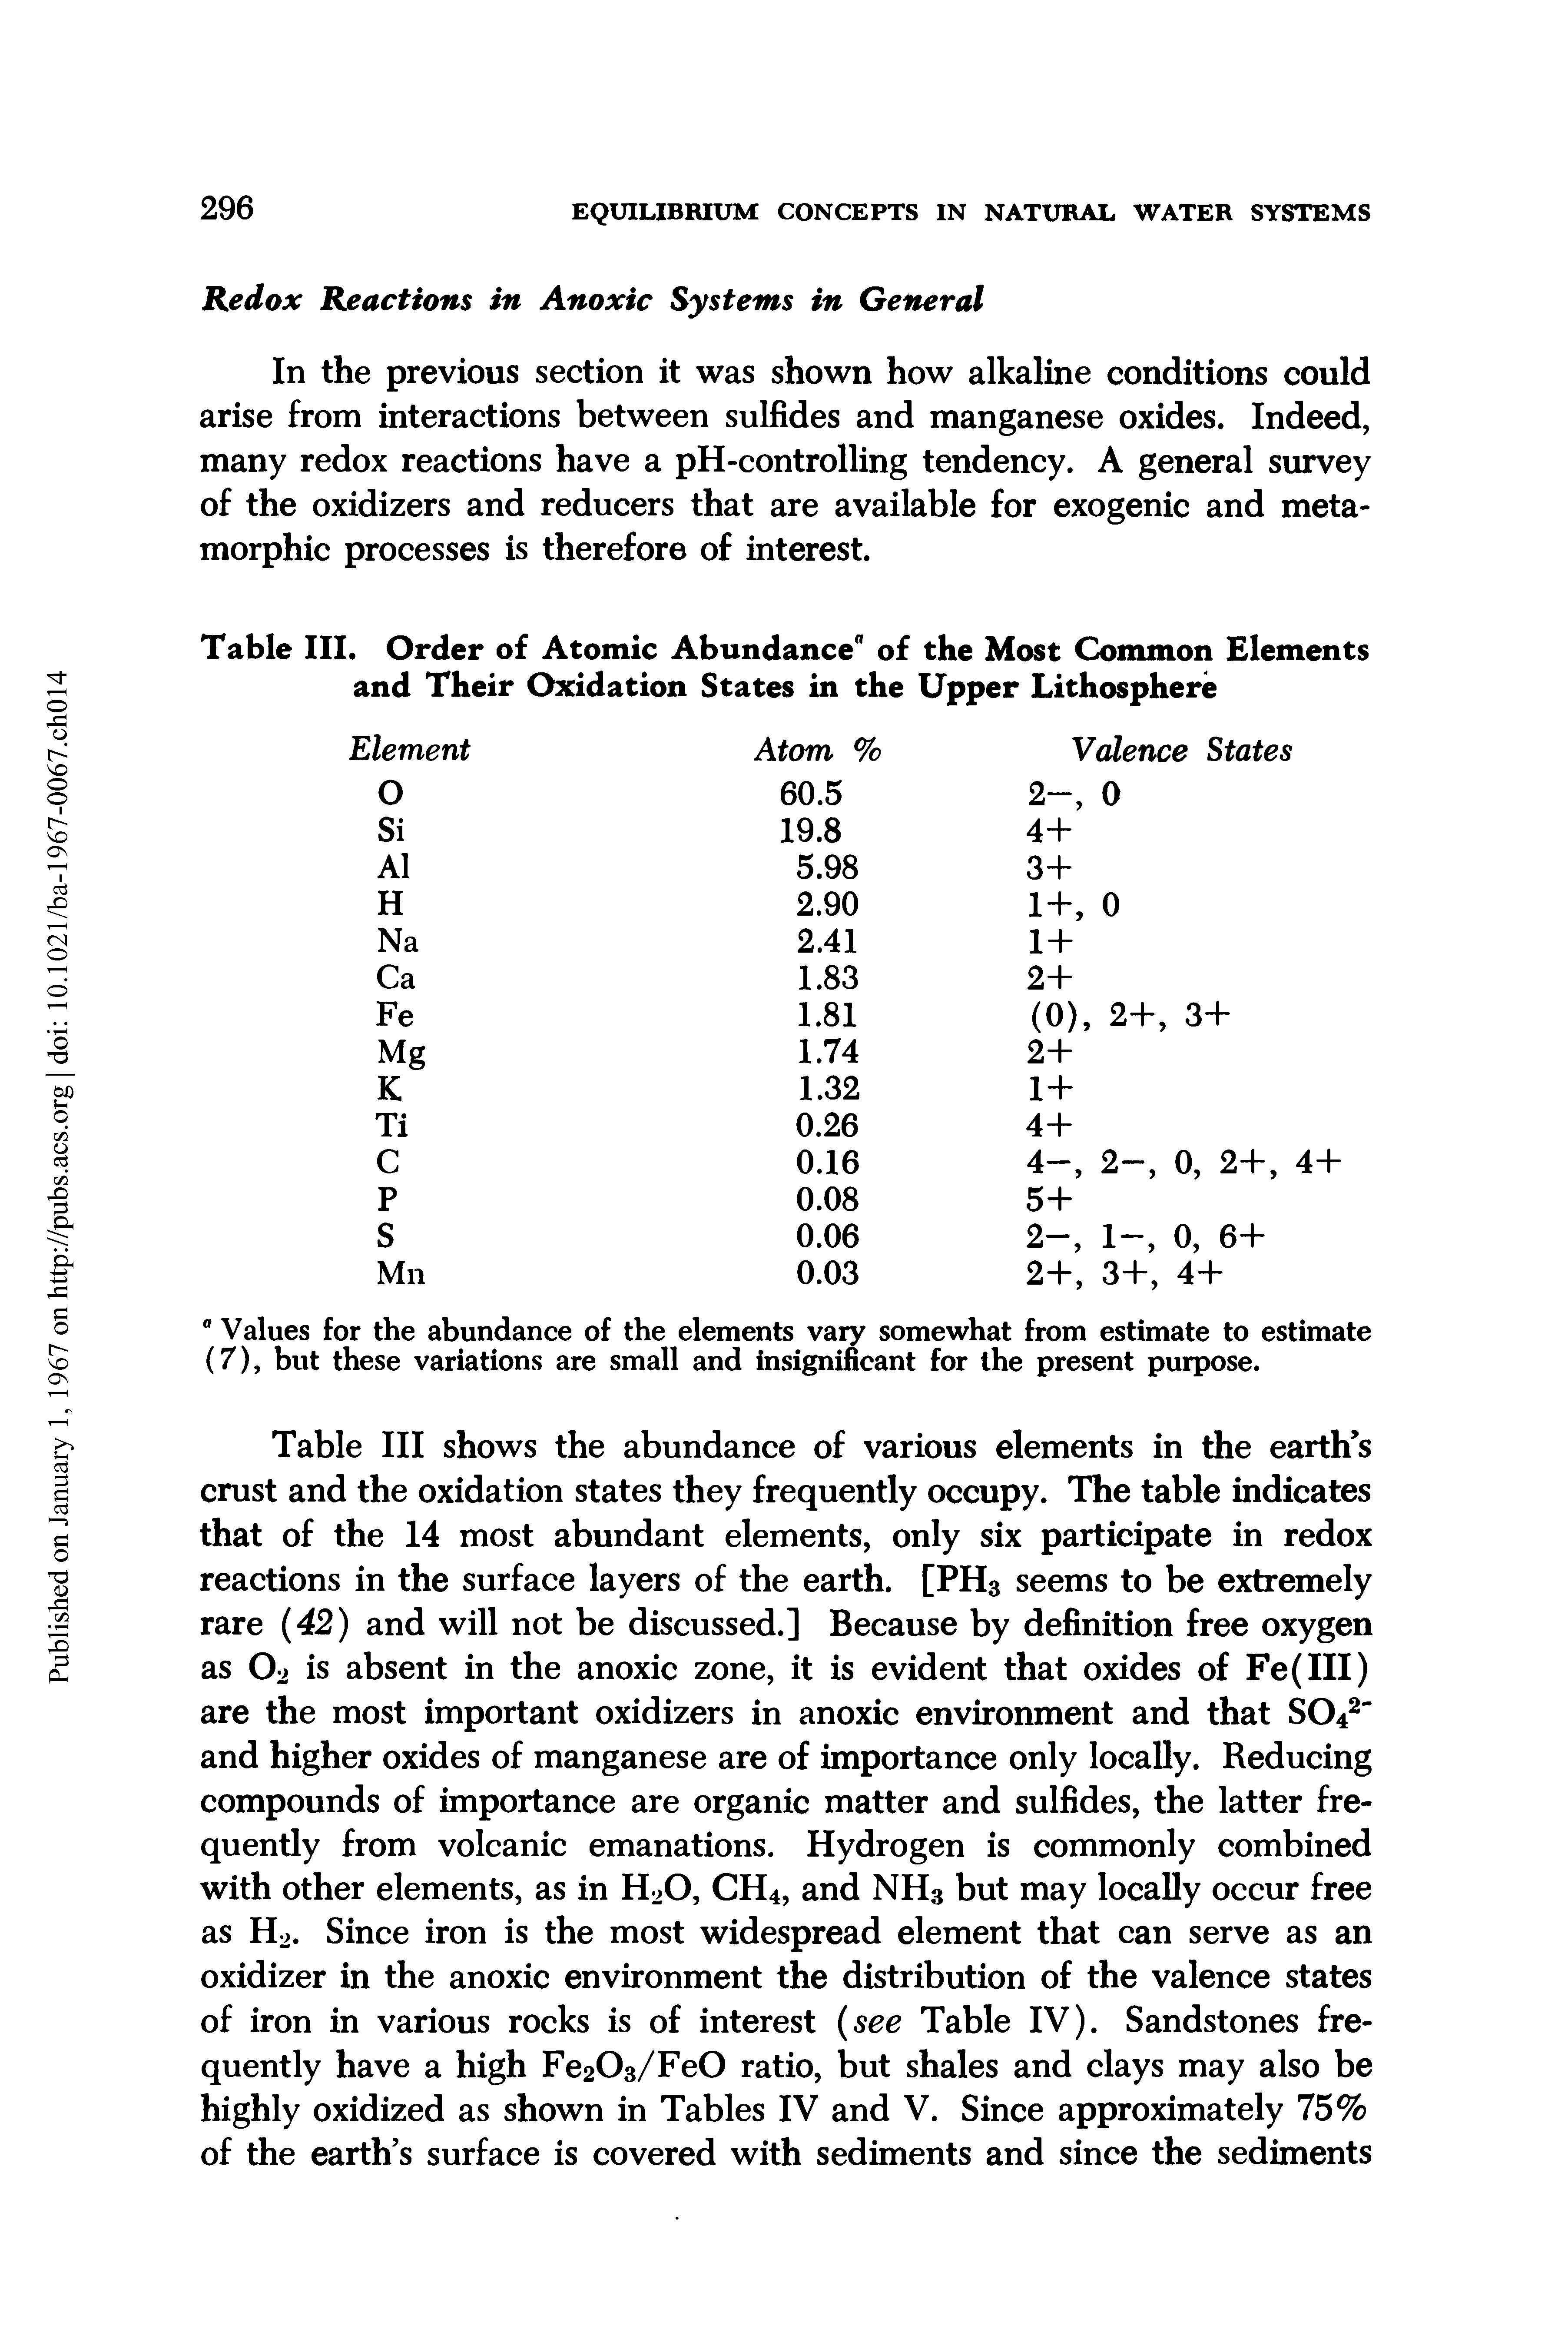 Table III shows the abundance of various elements in the earth s crust and the oxidation states they frequently occupy. The table indicates that of the 14 most abundant elements, only six participate in redox reactions in the surface layers of the earth. [PH3 seems to be extremely rare (42) and will not be discussed.] Because by definition free oxygen as 02 is absent in the anoxic zone, it is evident that oxides of Fe(III) are the most important oxidizers in anoxic environment and that S042 and higher oxides of manganese are of importance only locally. Reducing compounds of importance are organic matter and sulfides, the latter frequently from volcanic emanations. Hydrogen is commonly combined with other elements, as in H20, CH4, and NH3 but may locally occur free as H2. Since iron is the most widespread element that can serve as an oxidizer in the anoxic environment the distribution of the valence states of iron in various rocks is of interest (see Table IV). Sandstones frequently have a high Fe203/Fe0 ratio, but shales and clays may also be highly oxidized as shown in Tables IV and V. Since approximately 75% of the earth s surface is covered with sediments and since the sediments...